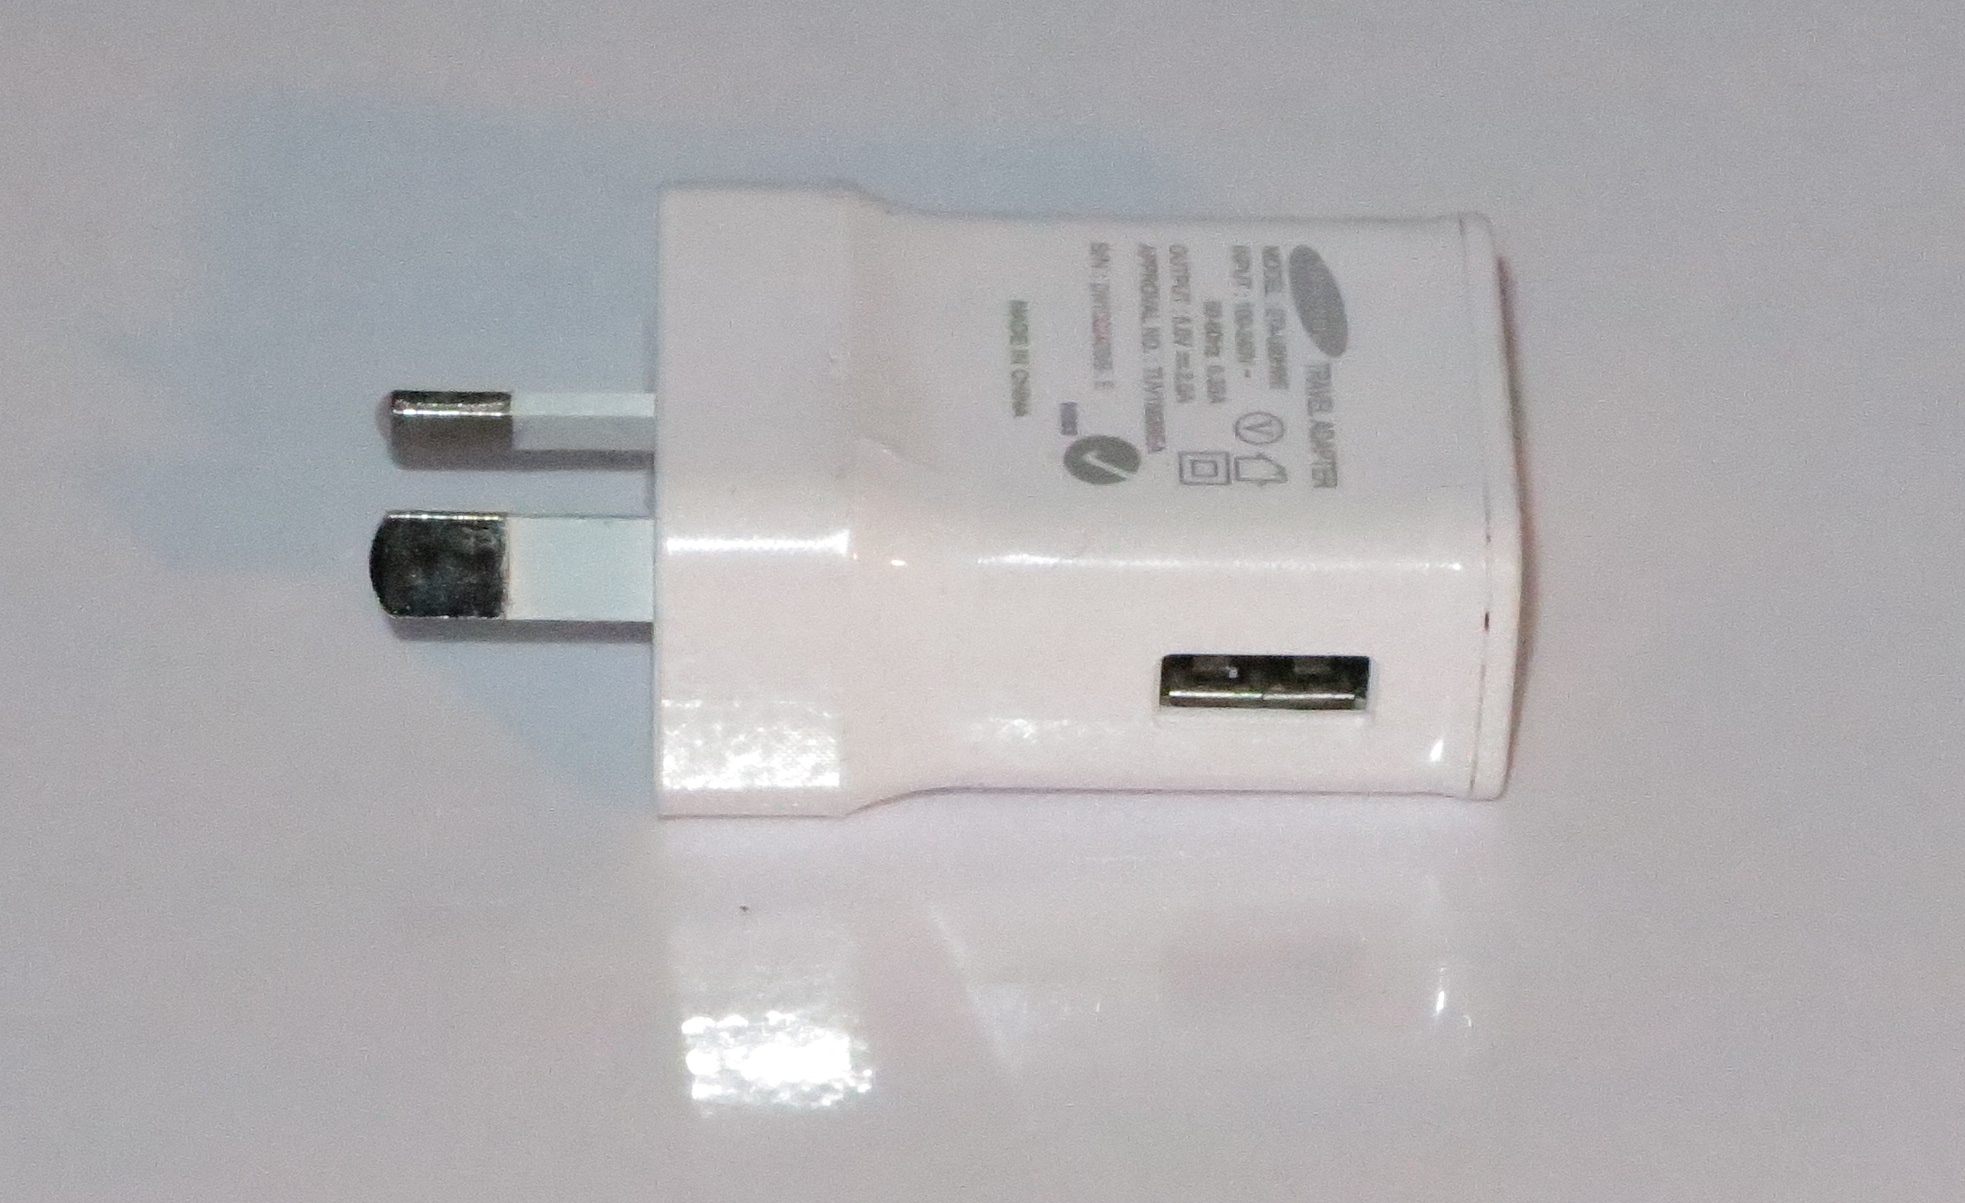 Should you worry about your USB charger’s current output for your gadgets?